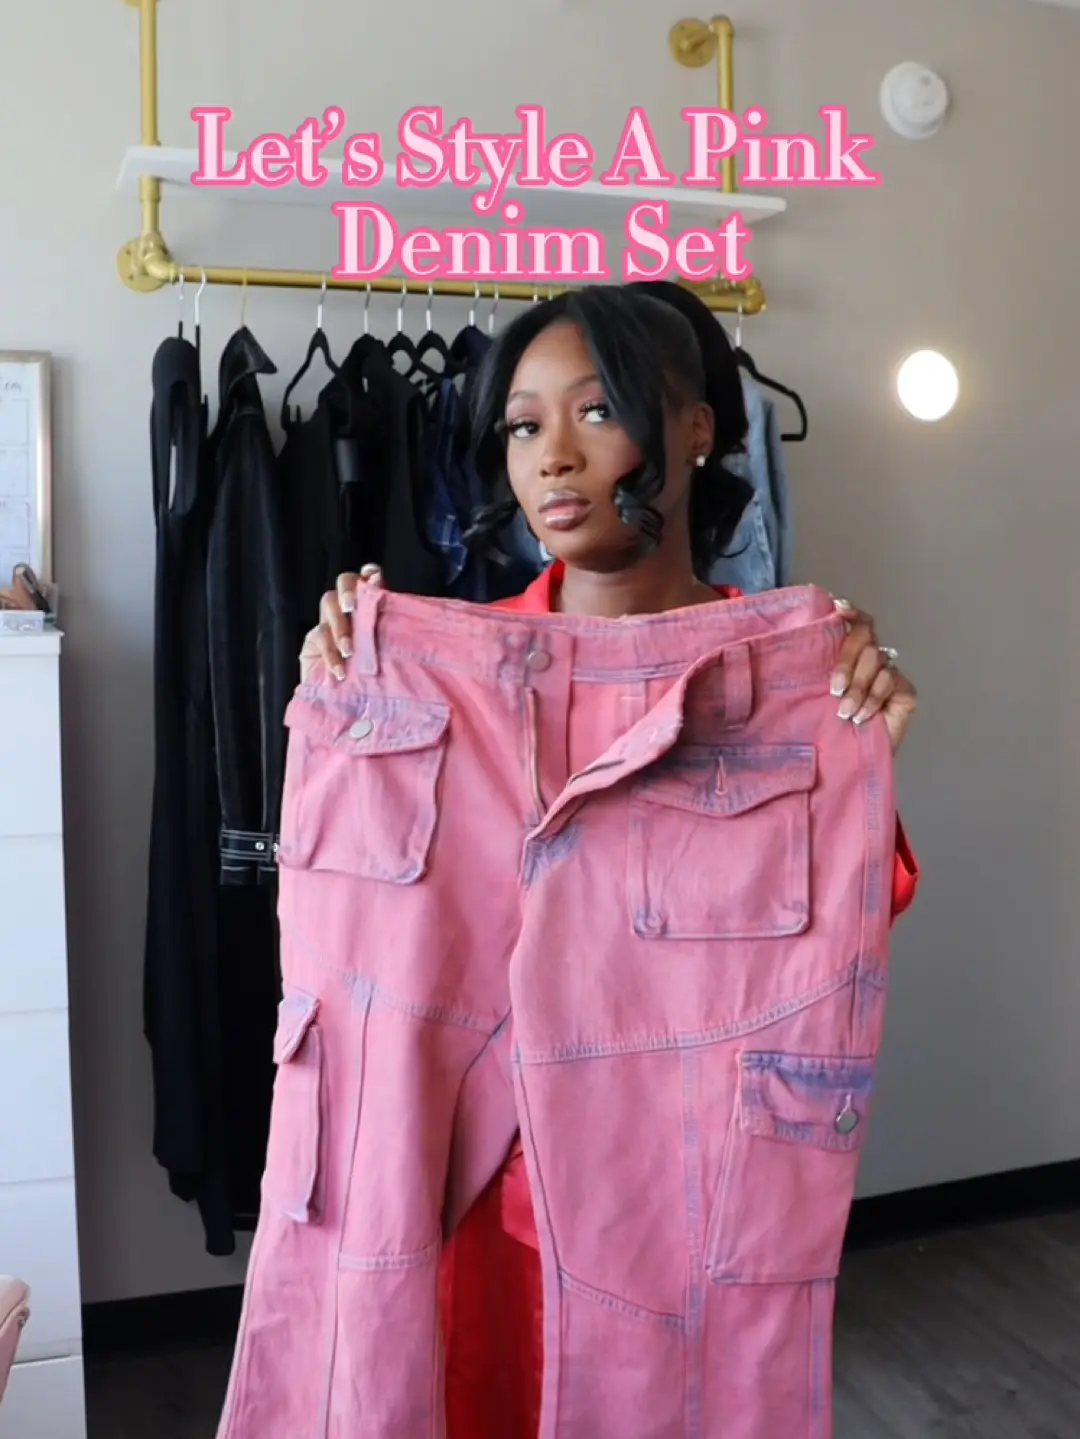 Pink + Denim = Forever in season whether you choose to save